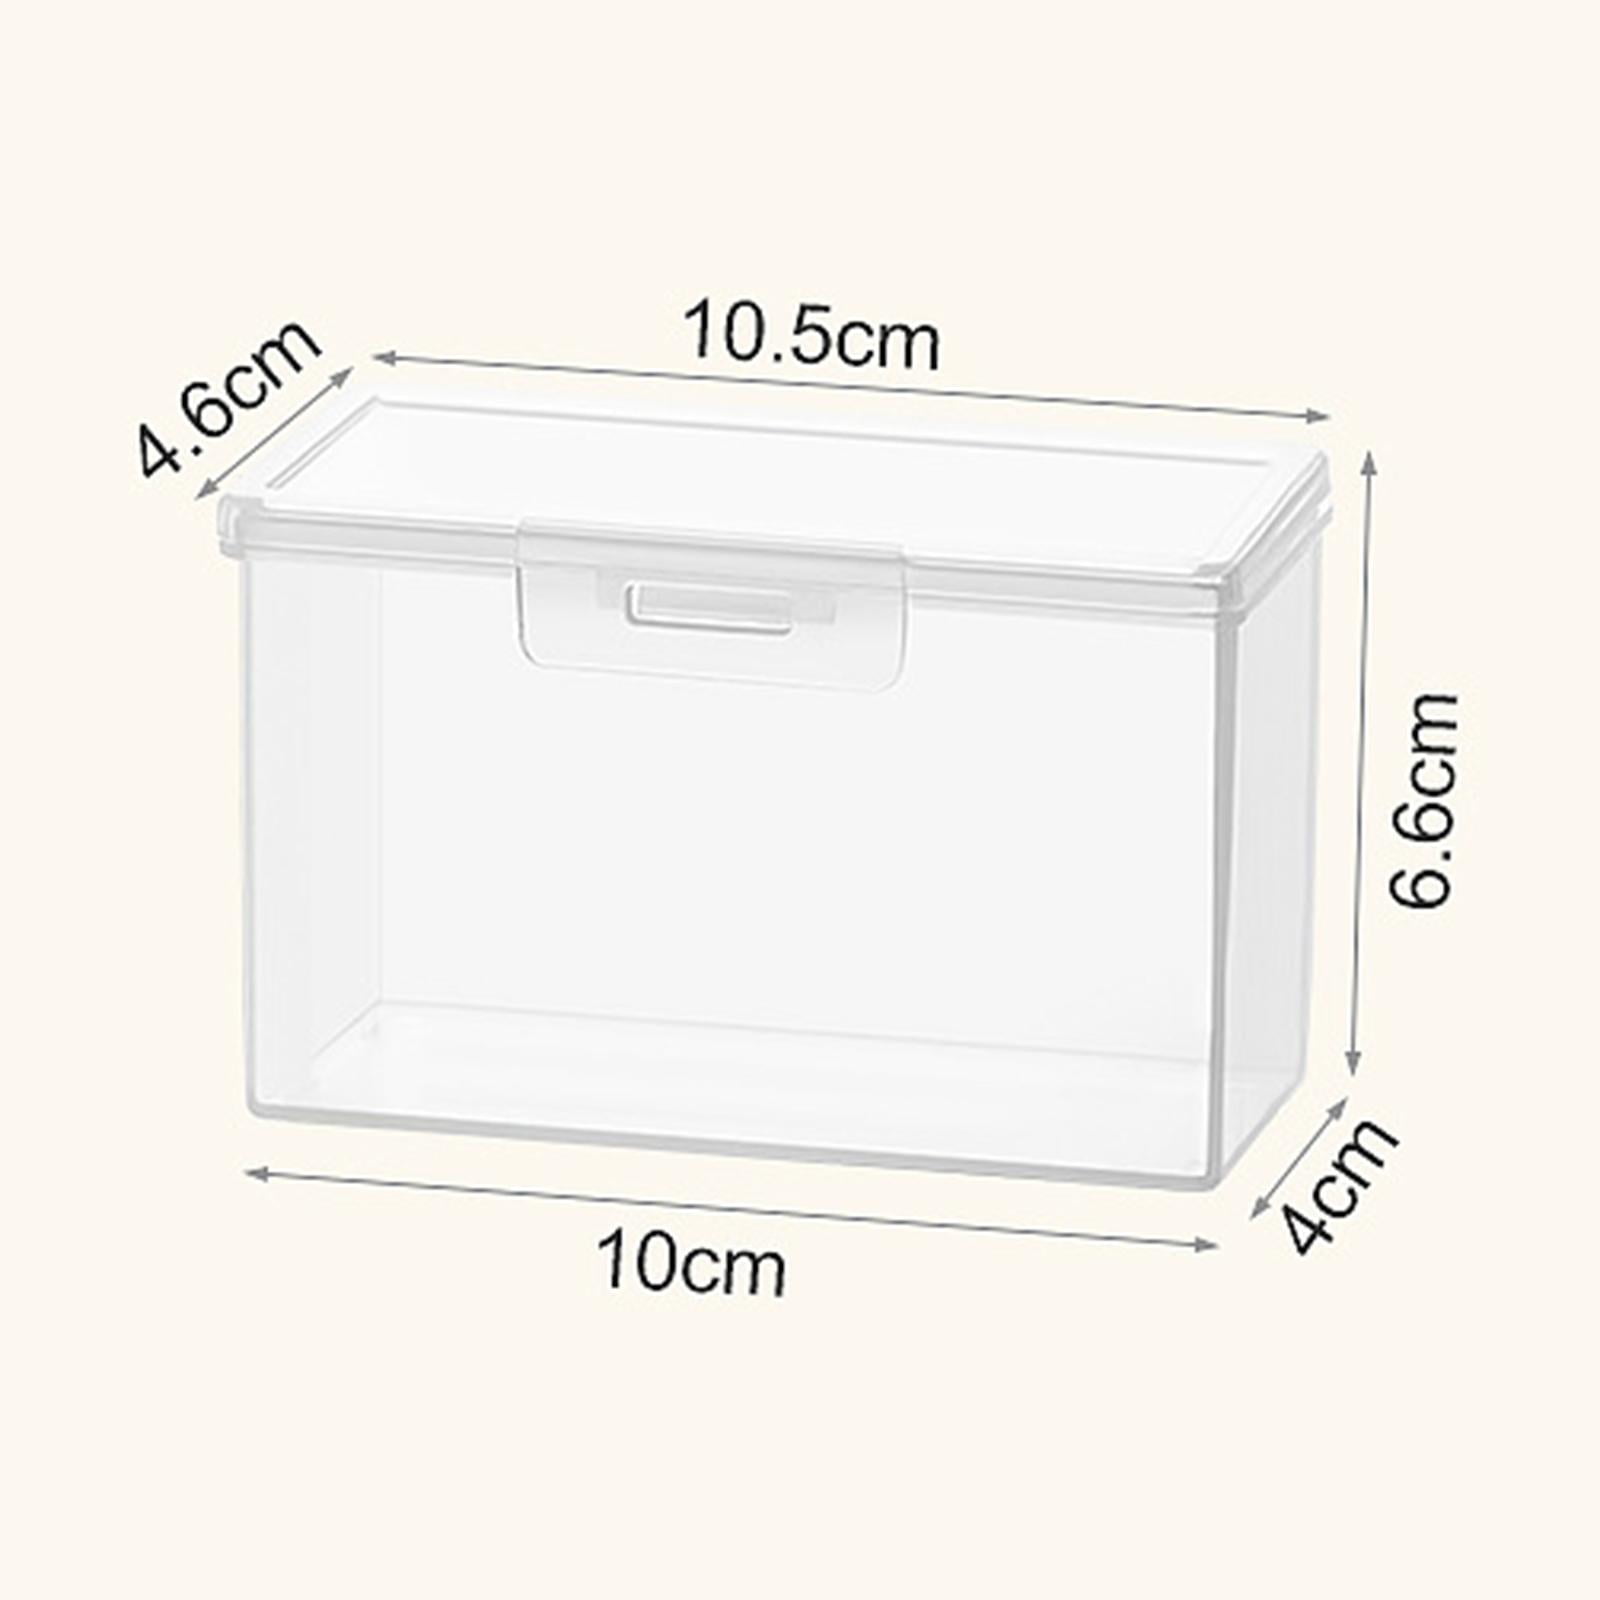 Picture Storage Box Container with Lid Transparent Portable Craft Keeper Organizer Photo Box for Postcard Photos Cards Stamps 770ml, Size: 770 mL